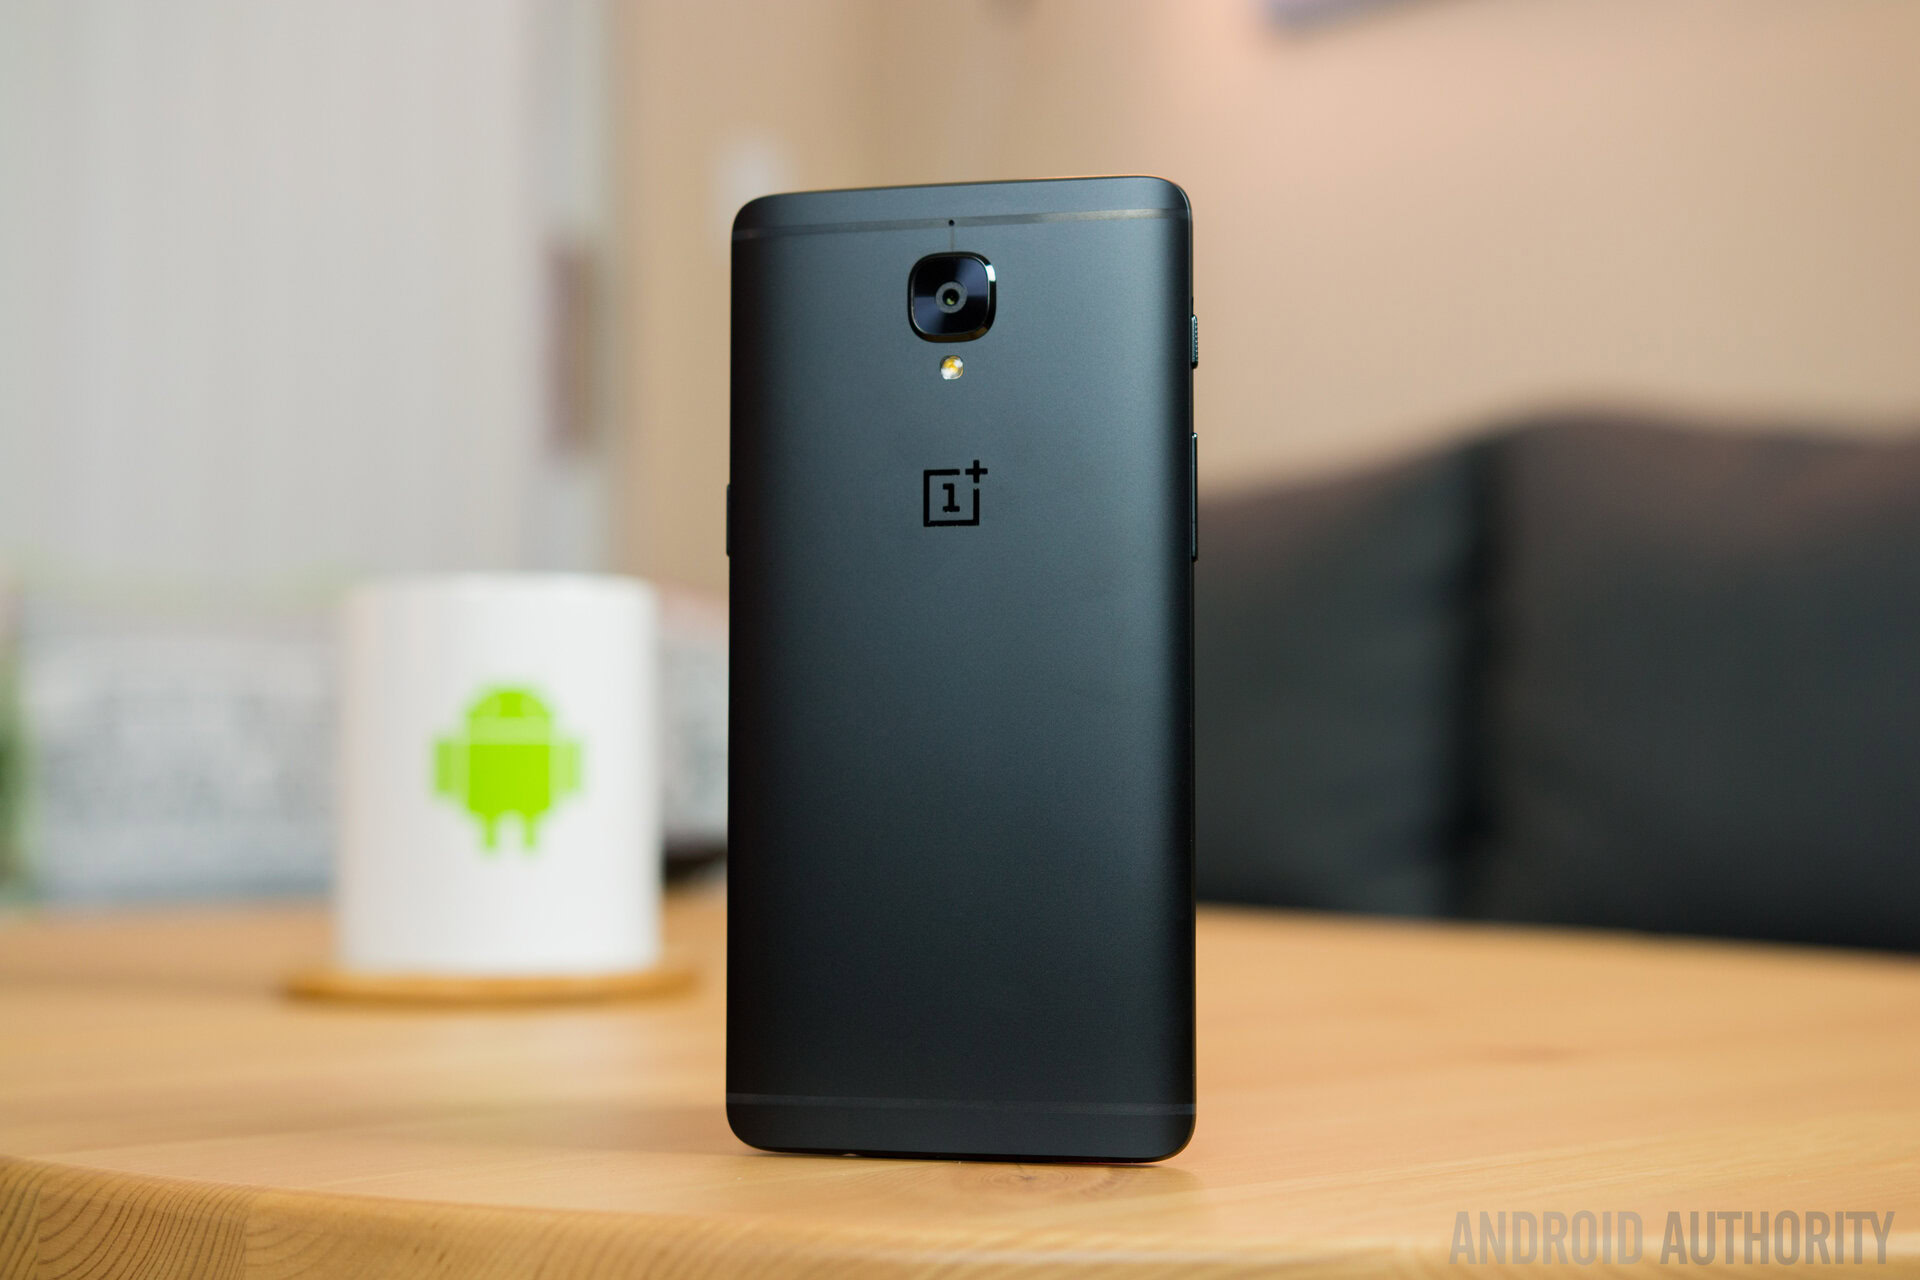 The OnePlus 3T.